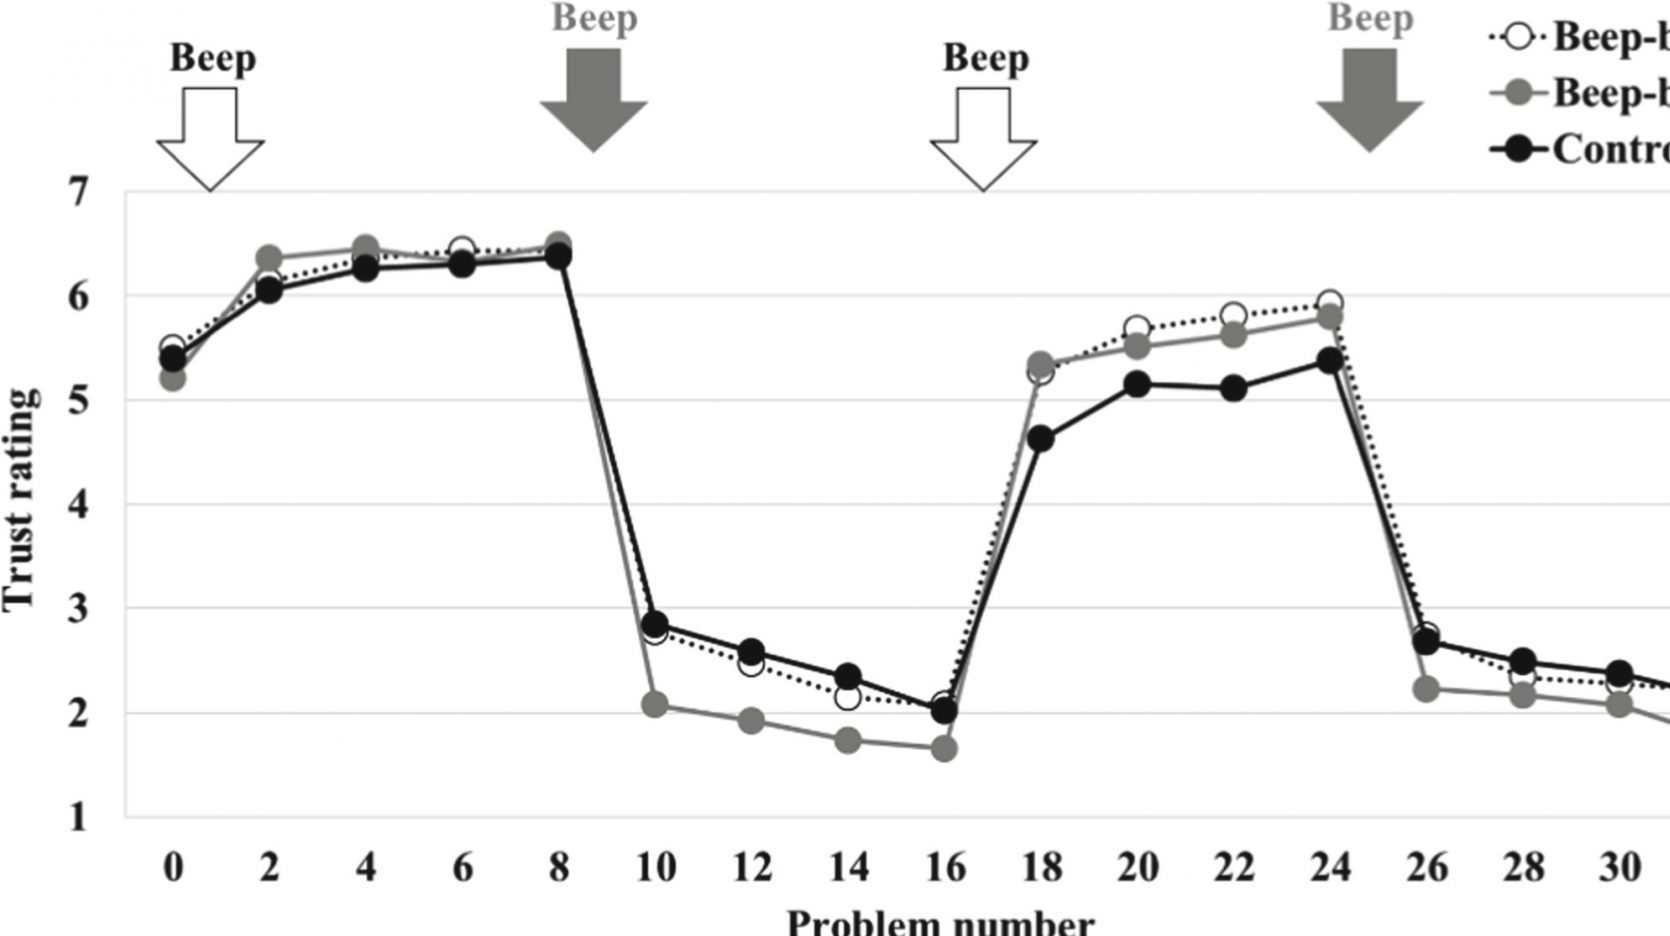 Effects of Beep-Sound Timings on Trust Dynamics in Human-Robot Interaction